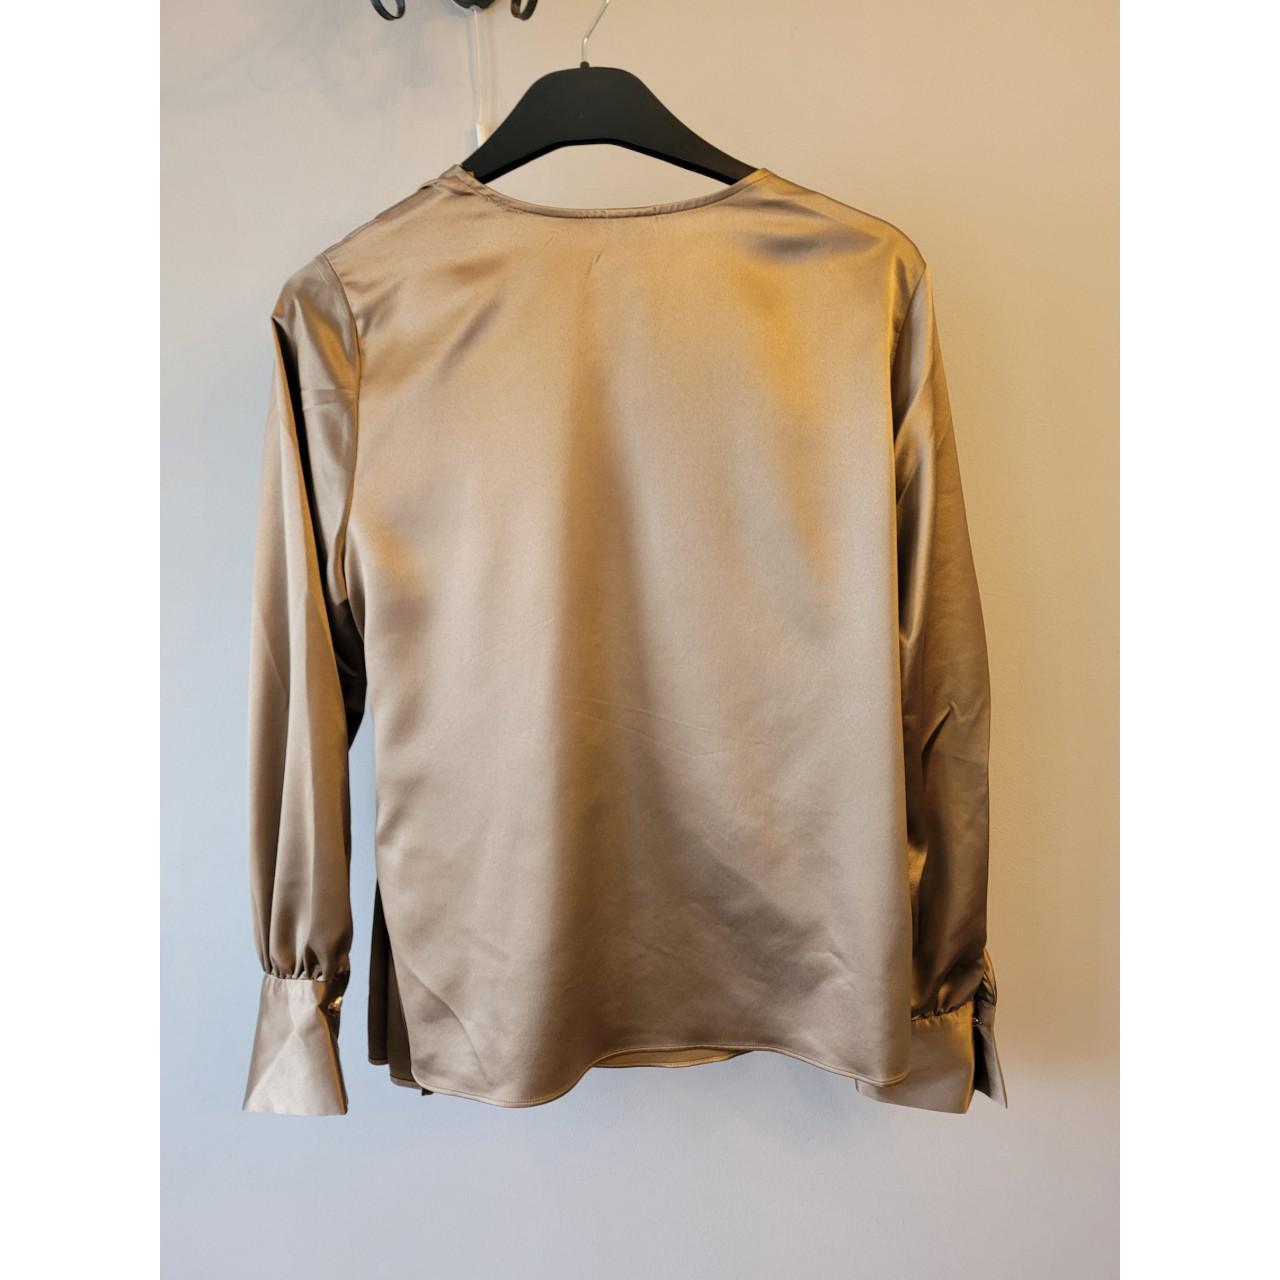 River Island Women's Gold and Tan Blouse (3)